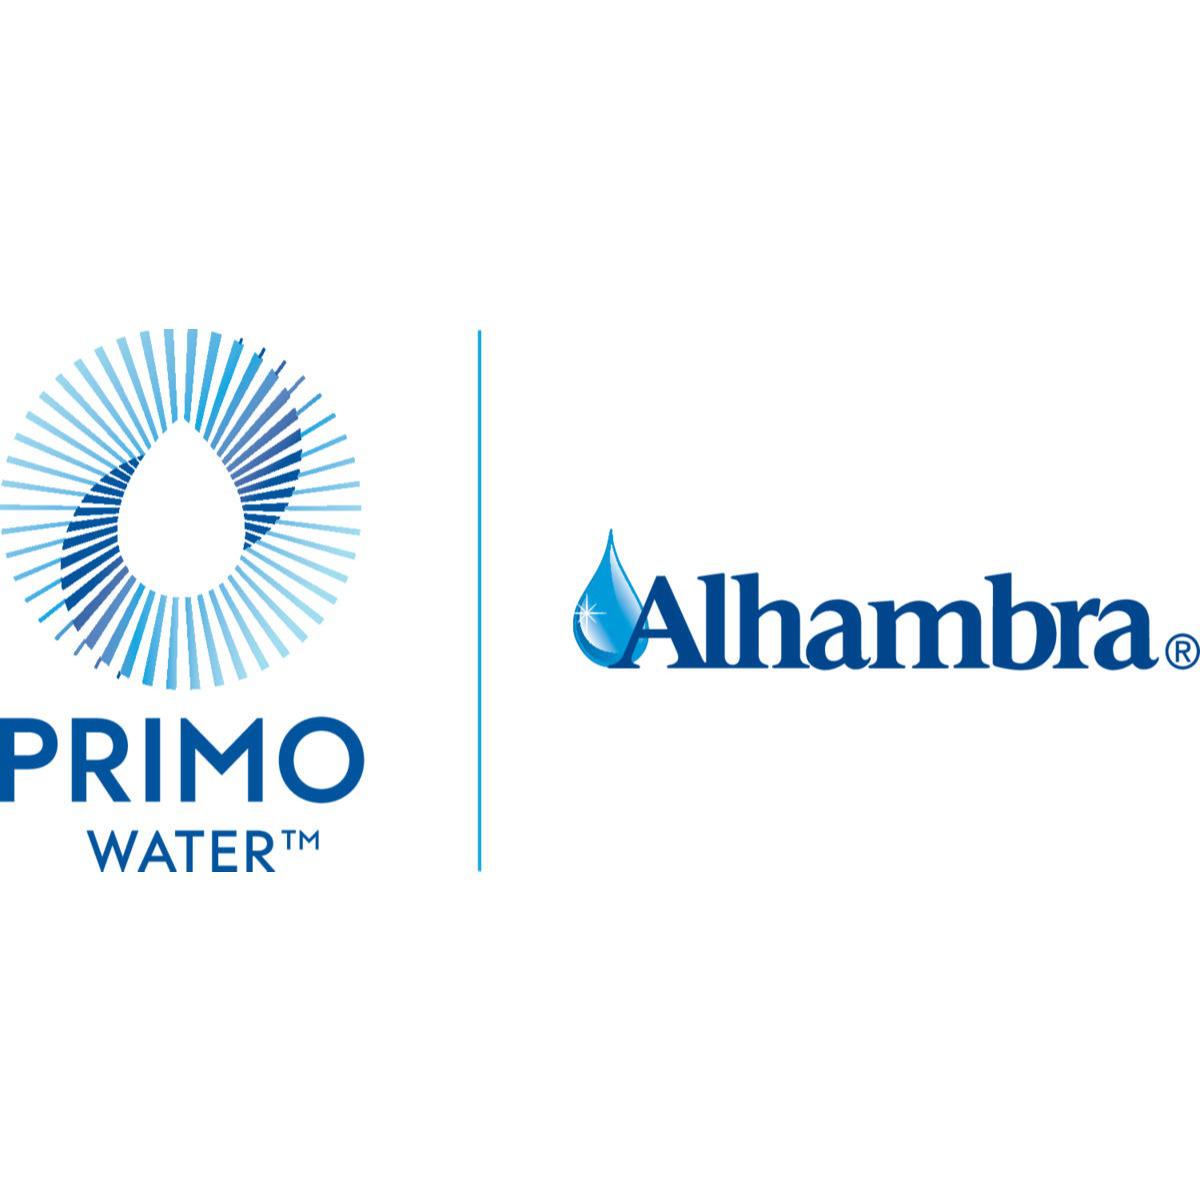 Alhambra Water Delivery Service 4576 - San Francisco, CA - (800)492-8377 | ShowMeLocal.com